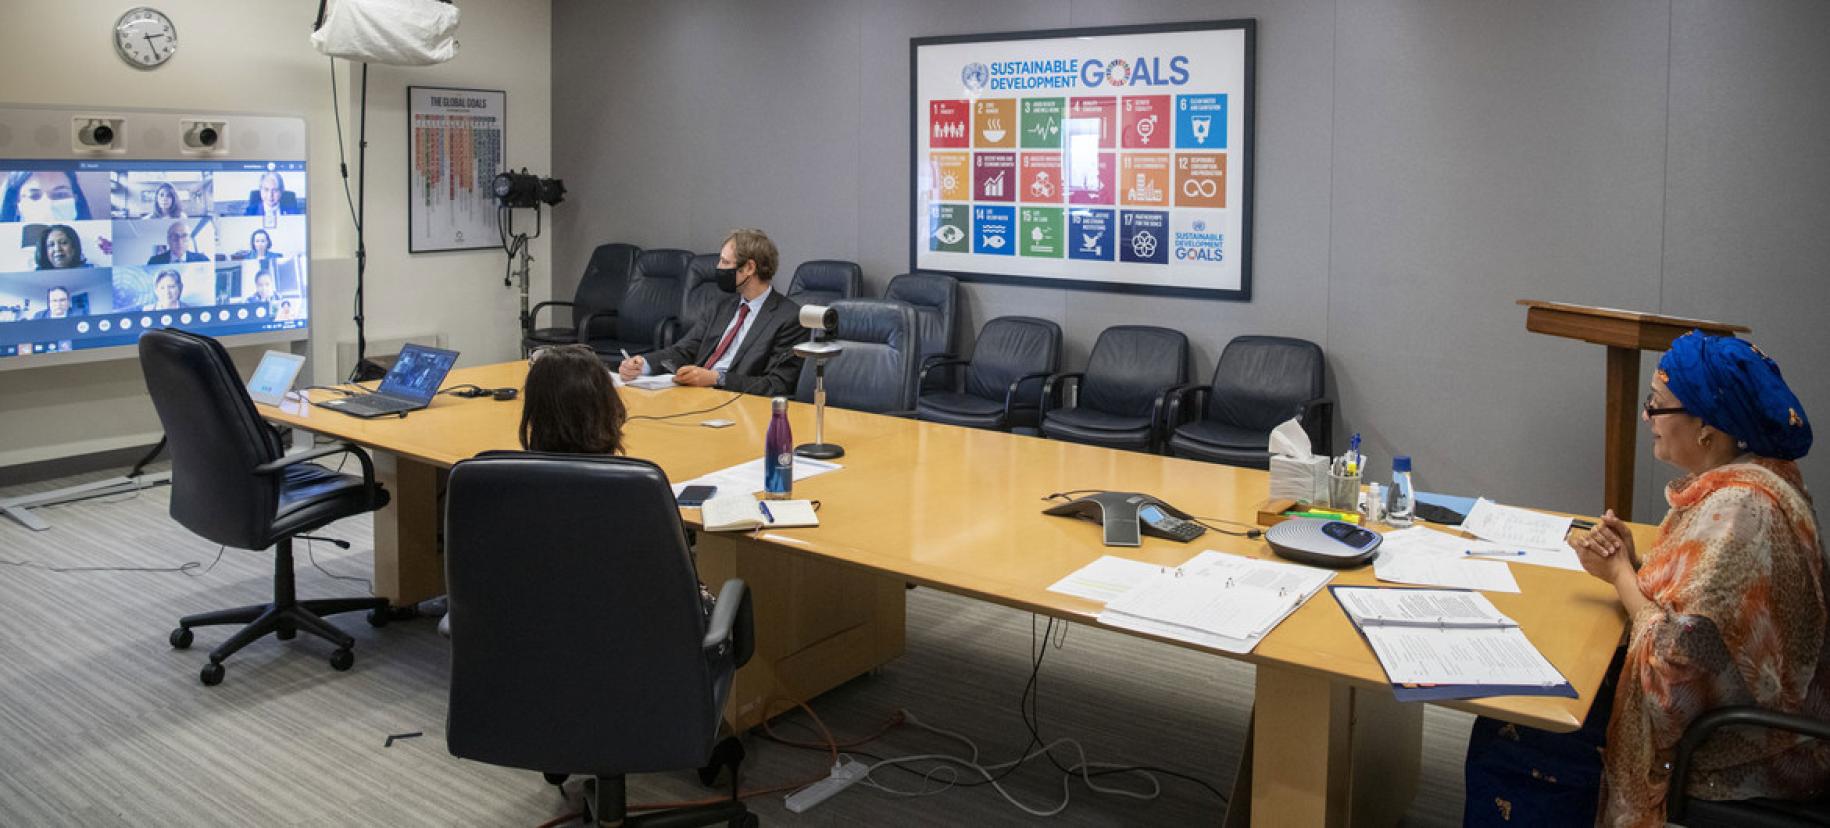 Deputy UN Secretary-General Amina Mohammed takes part in a virtual visit to Colombia. Pictured here, she meets officials, via videoconference, from her office at UN Headquarters in New York.